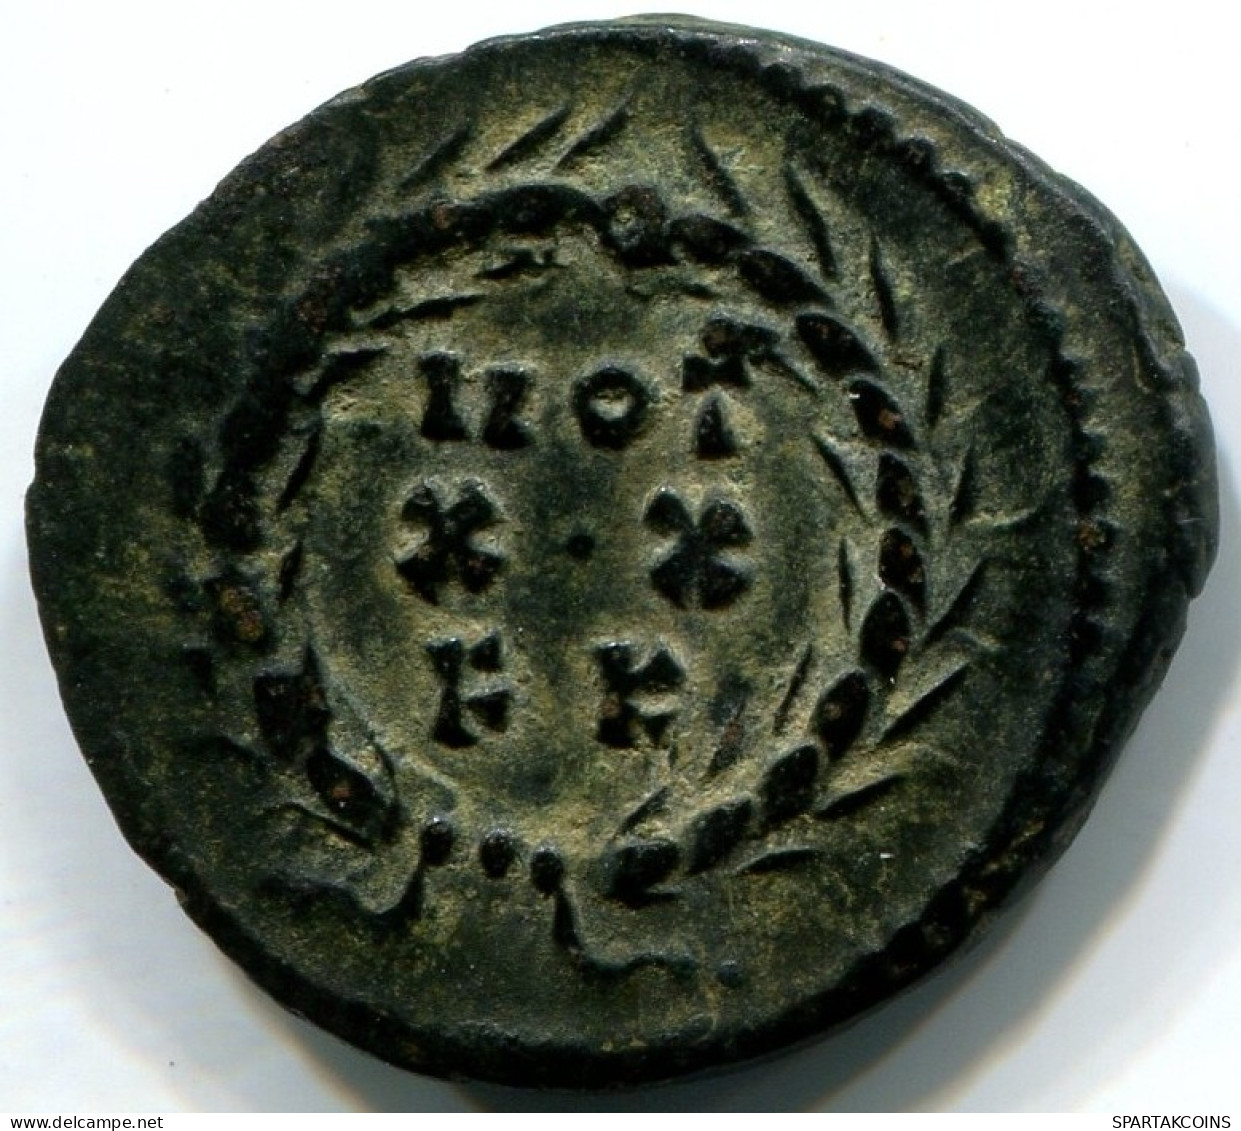 DIOCLETIAN AE Radiate Fraction Carthage FK AD303 VOT-XX-FK RARE #ANC12439.23.F.A - The Tetrarchy (284 AD To 307 AD)